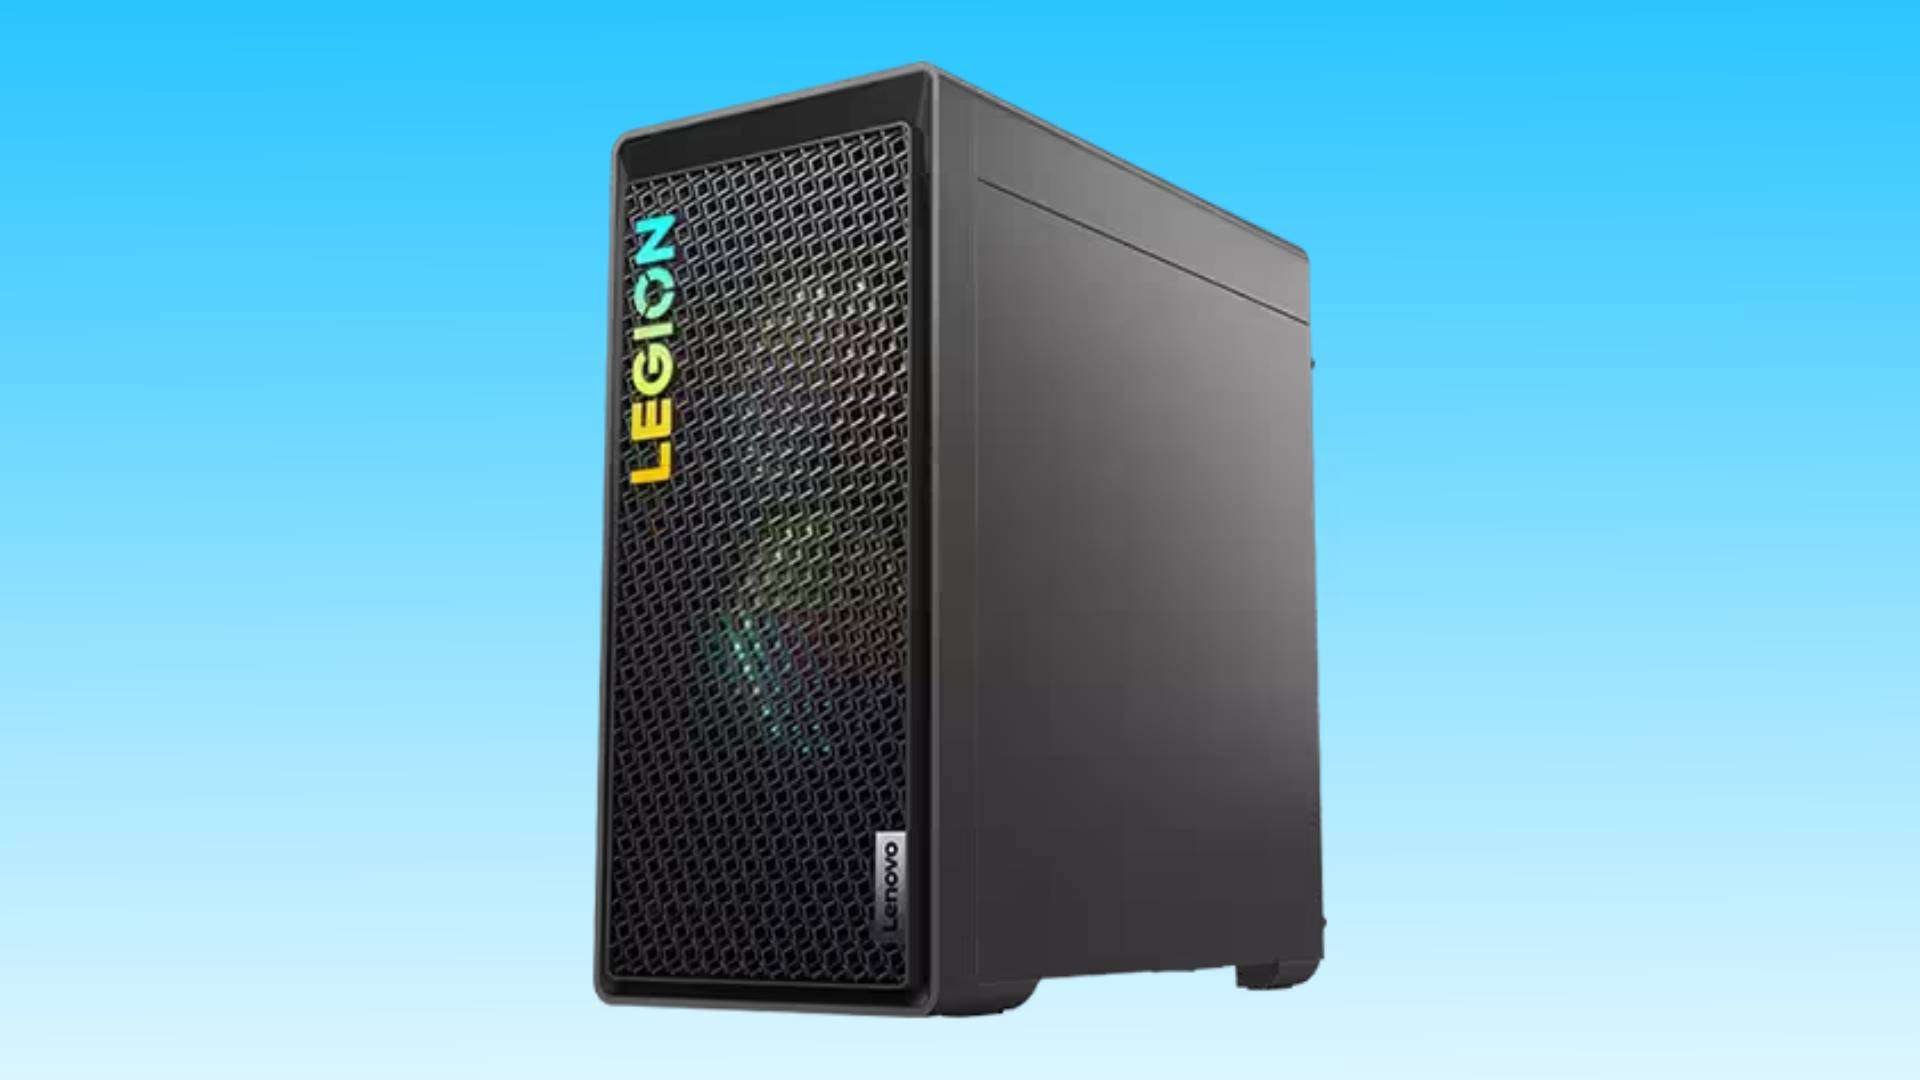 Black Lenovo Legion T5 desktop computer tower with a mesh front panel and RGB lighting, displayed against a blue gradient background.